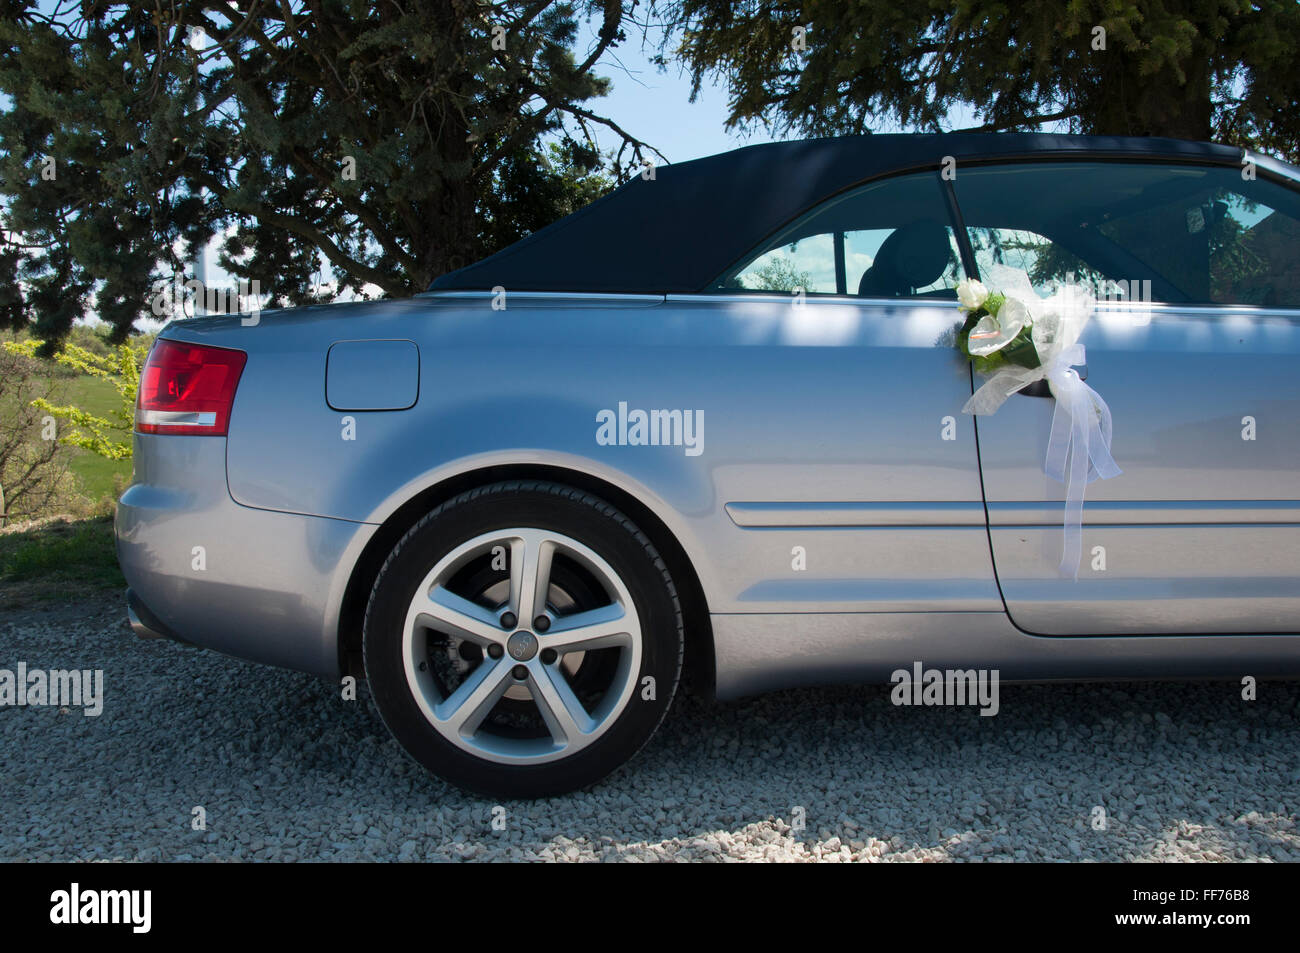 Wedding flowers hanging from the mirror of a car audi Stock Photo